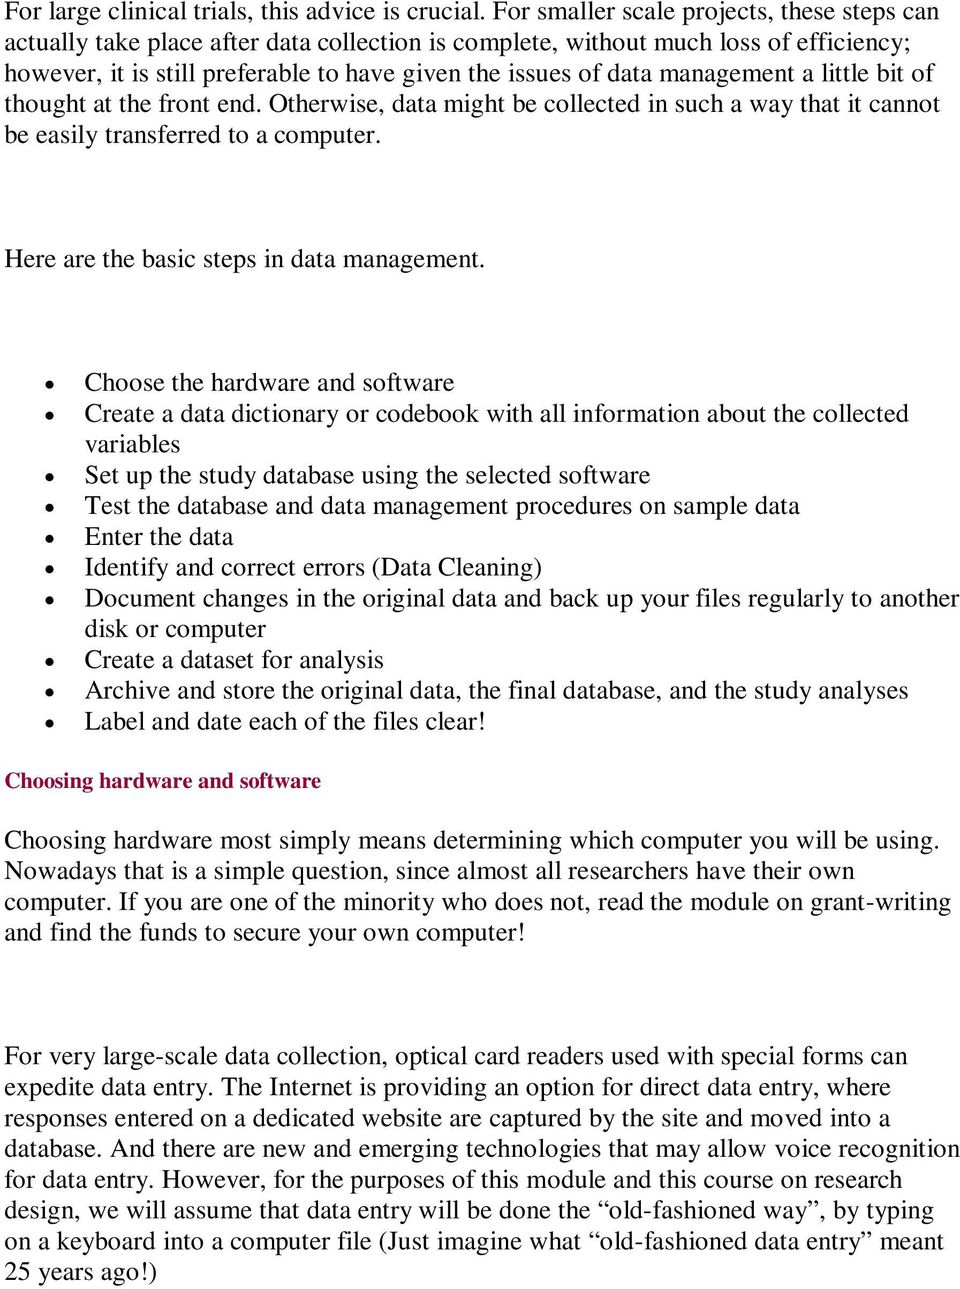 management a little bit of thought at the front end. Otherwise, data might be collected in such a way that it cannot be easily transferred to a computer. Here are the basic steps in data management.